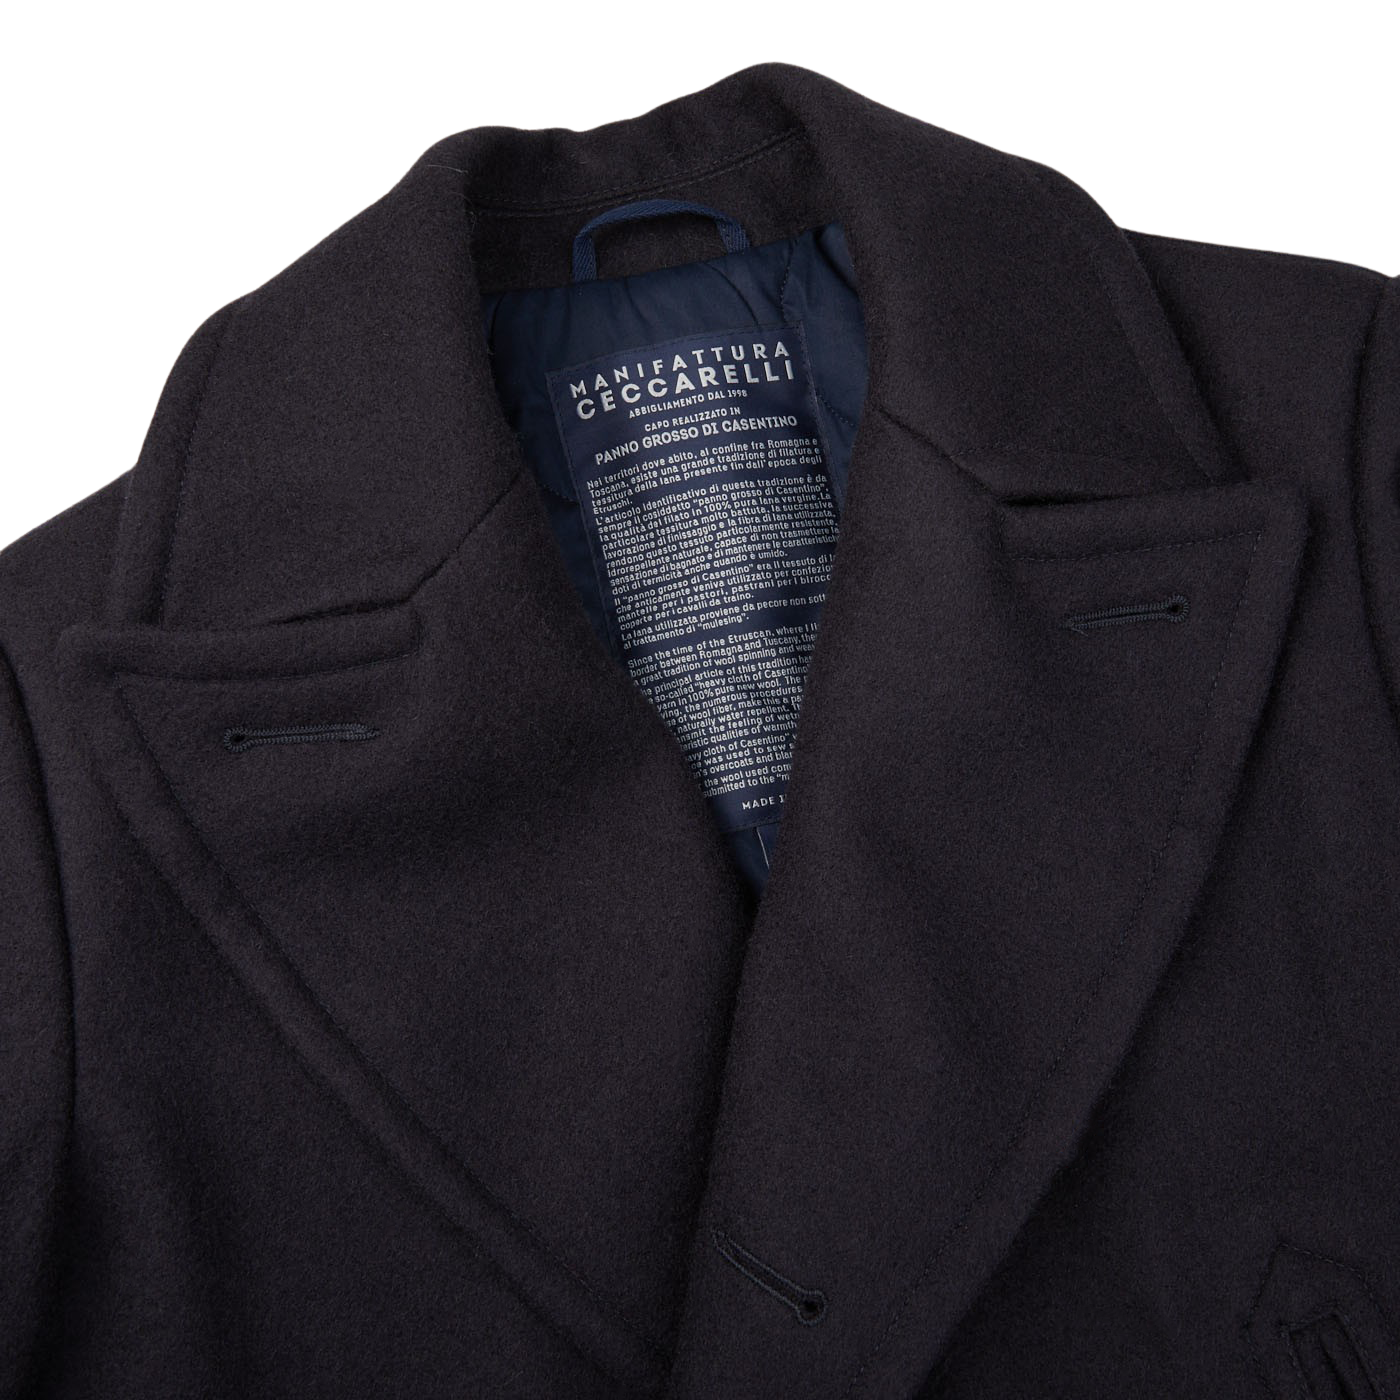 A Navy Blue Heavy Wool Casentino Peacoat with a label by Manifattura Ceccarelli.